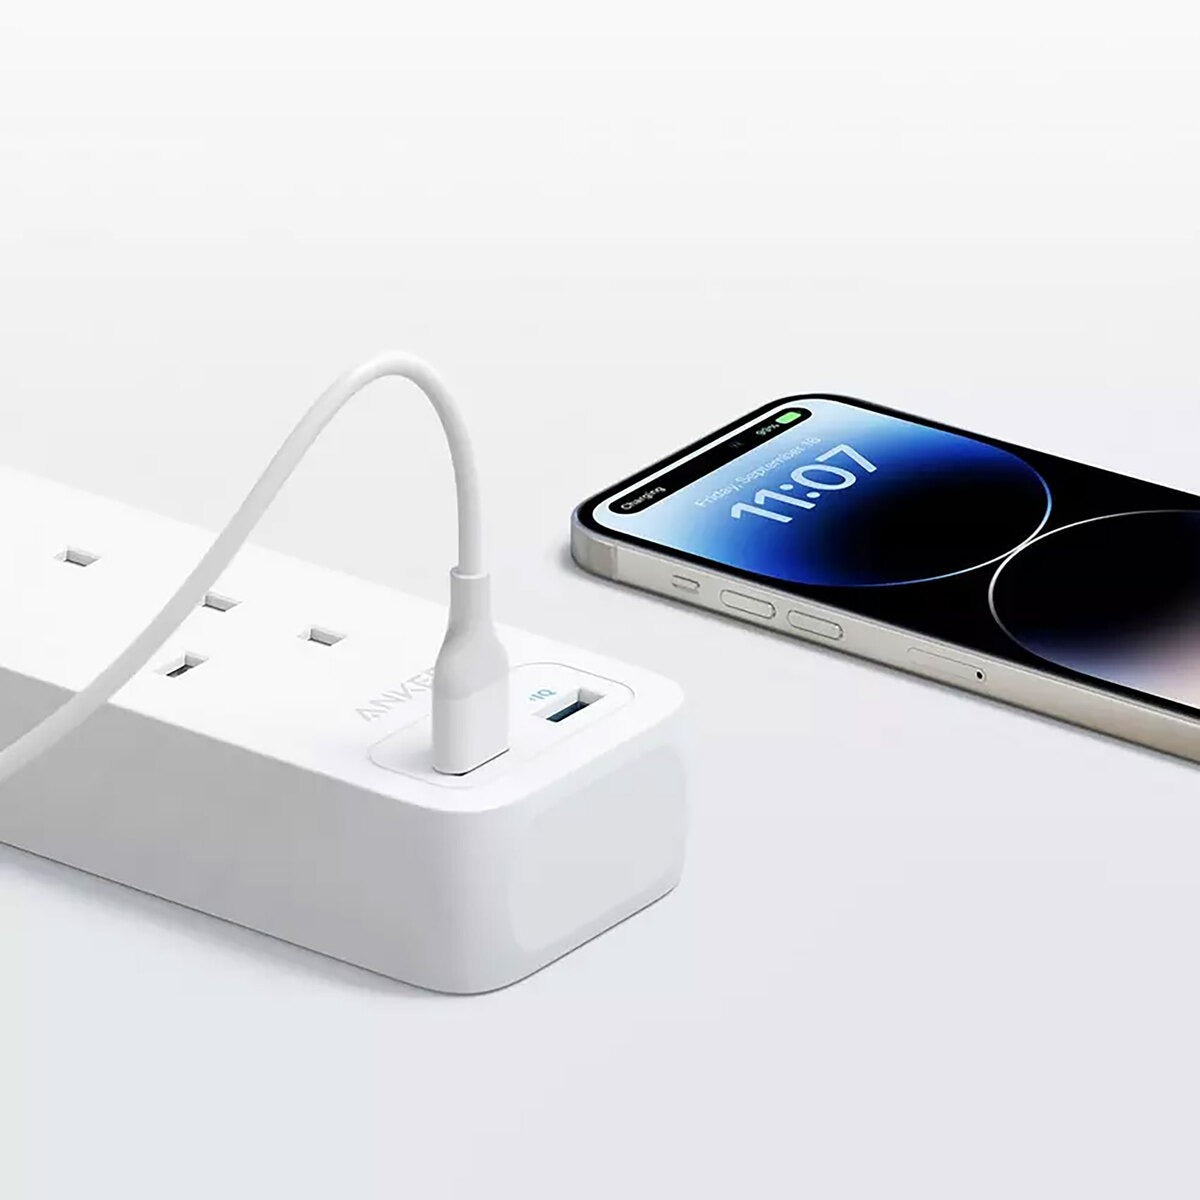 6-in-1 power strip with USB charging